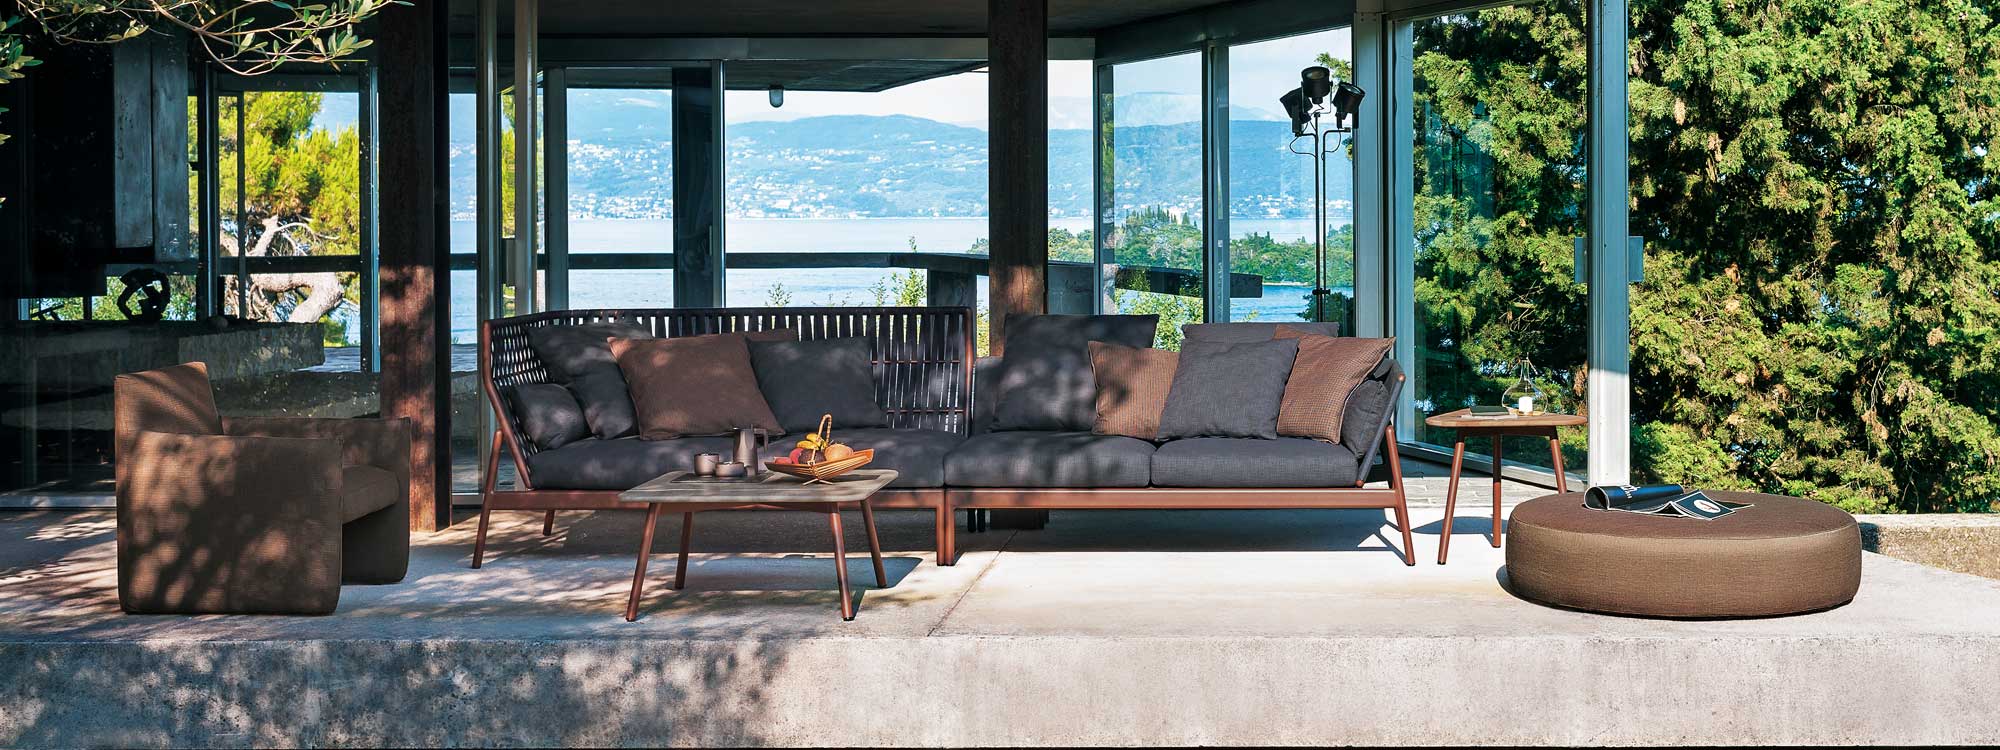 Piper outdoor sofa & modern exterior lounge furniture in high quality outdoor furniture materials by Roda contemporary outdoor furniture